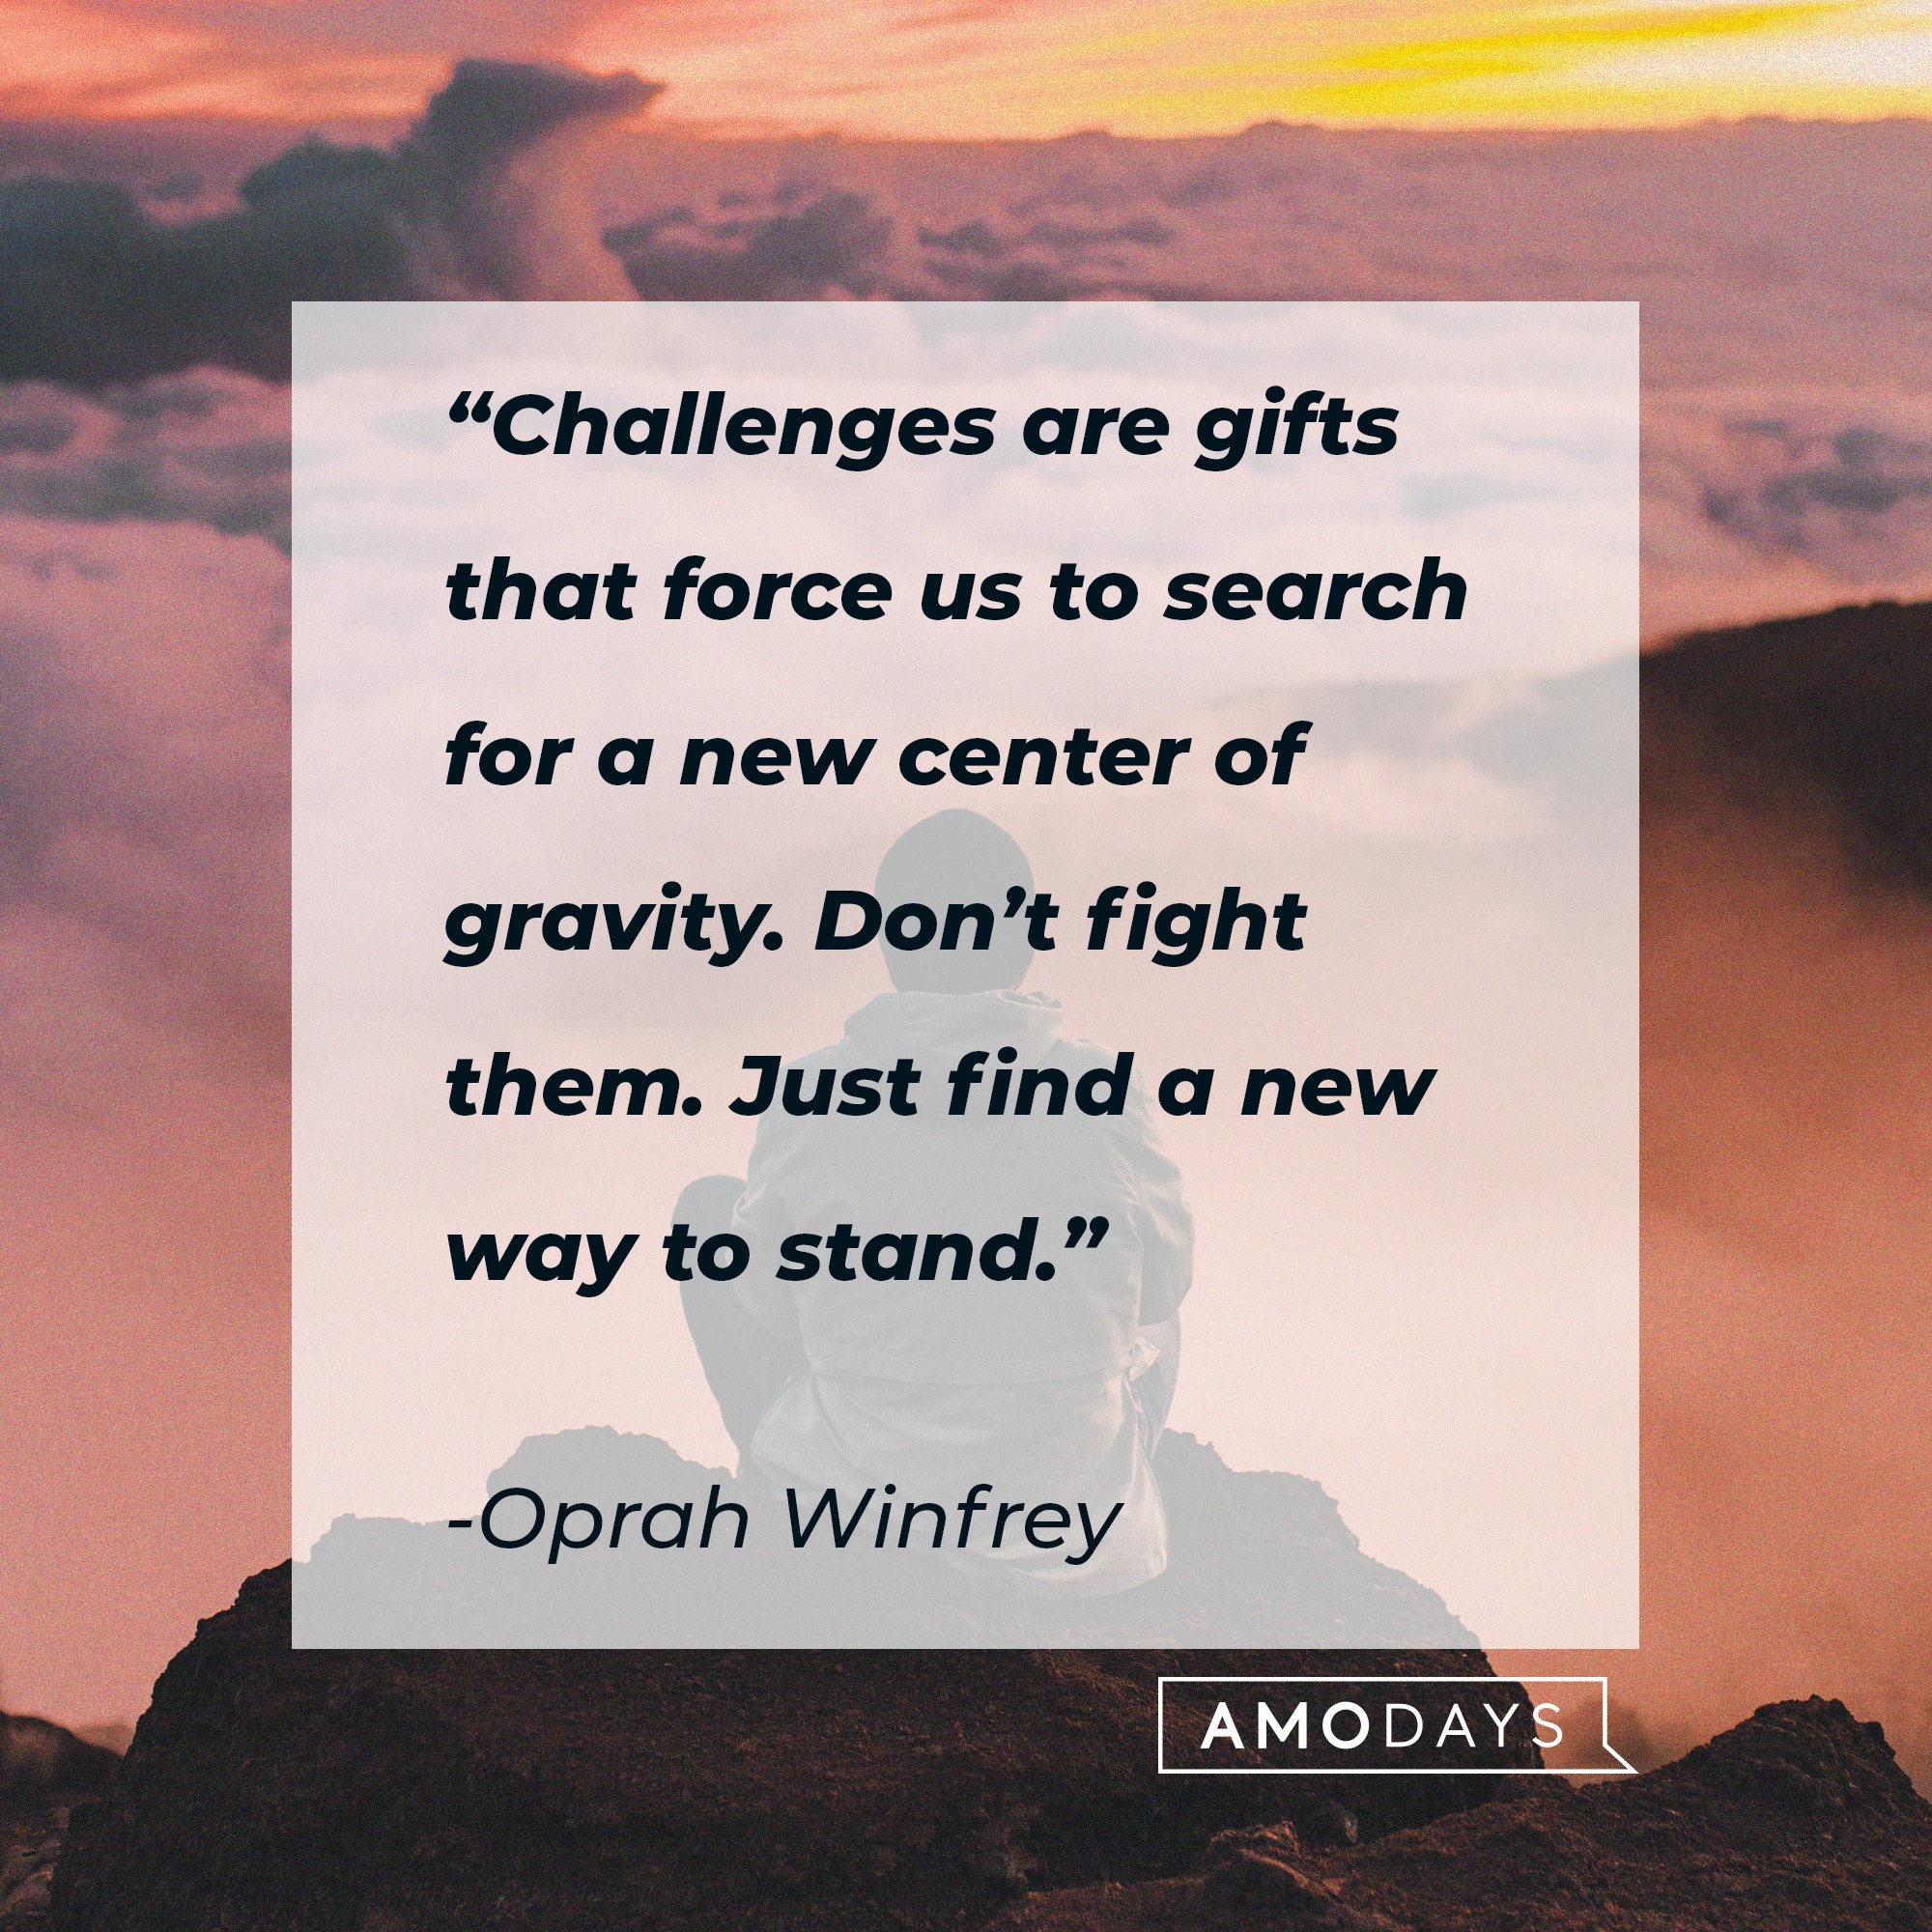 Oprah Winfrey's quote: “Challenges are gifts that force us to search for a new center of gravity. Don’t fight them. Just find a new way to stand.” | Image: AmoDays